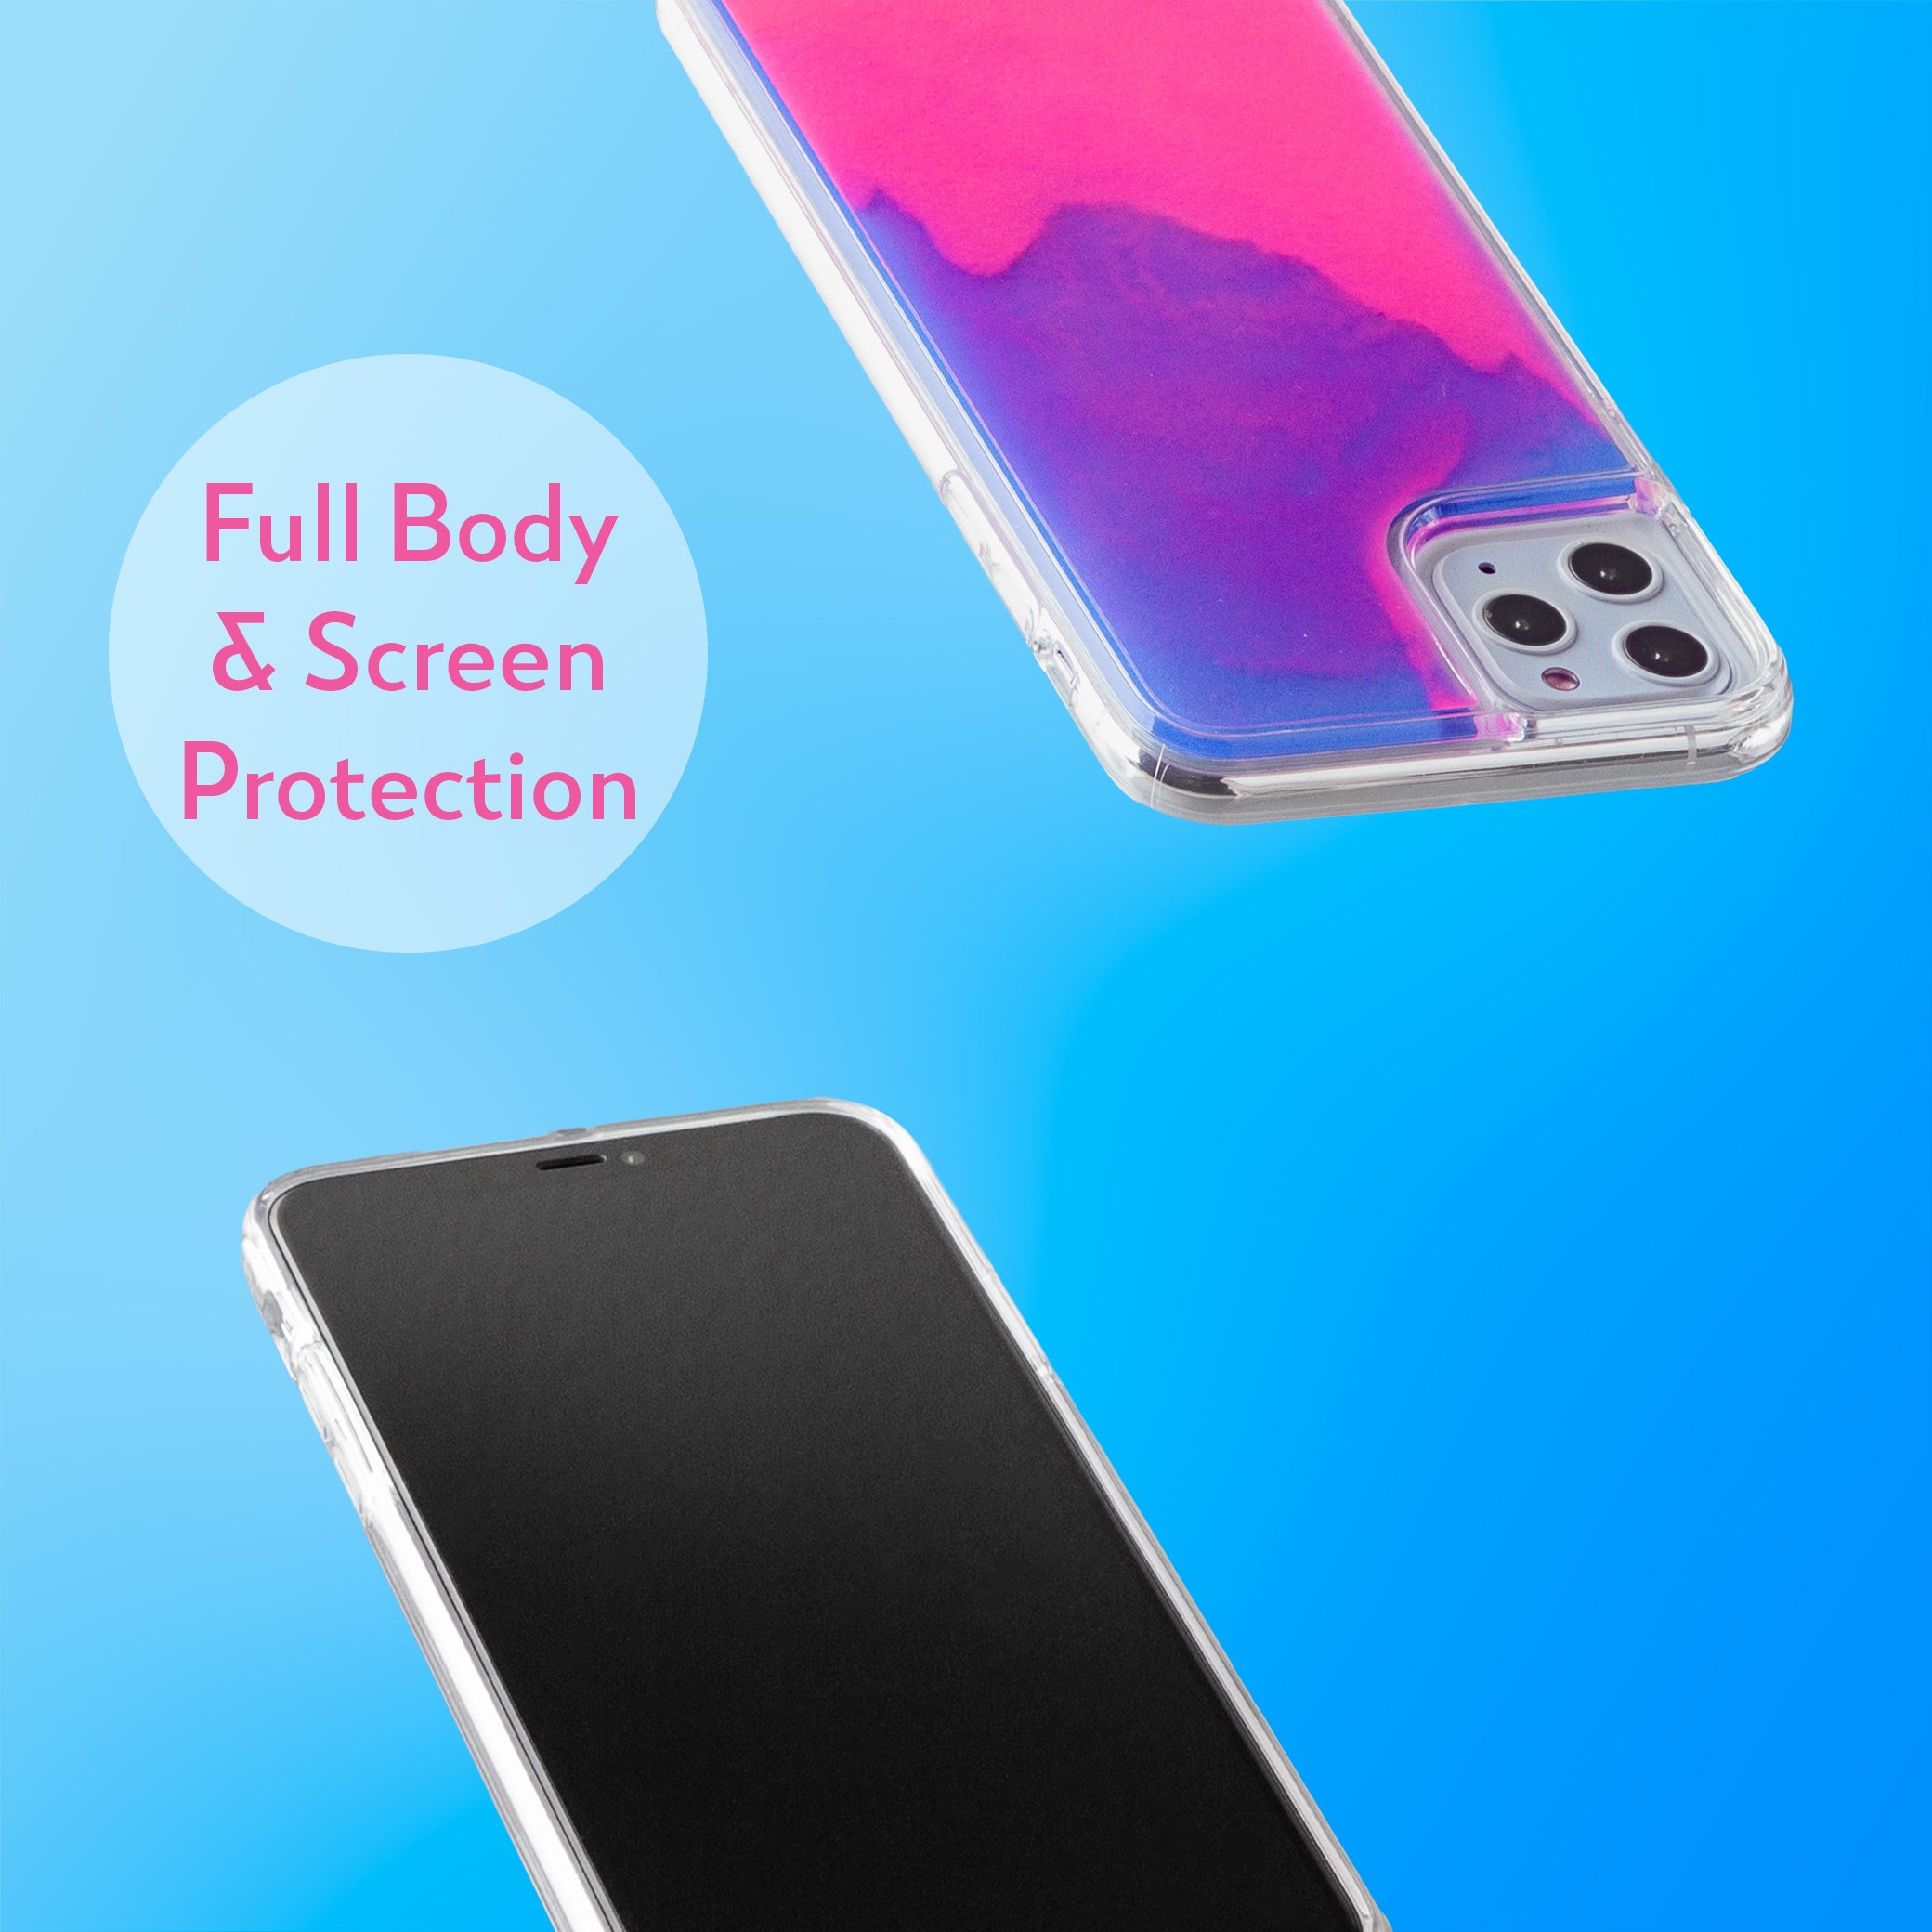 Neon Sand iPhone 11 Pro Max Case - Blueberry and Pink Glow